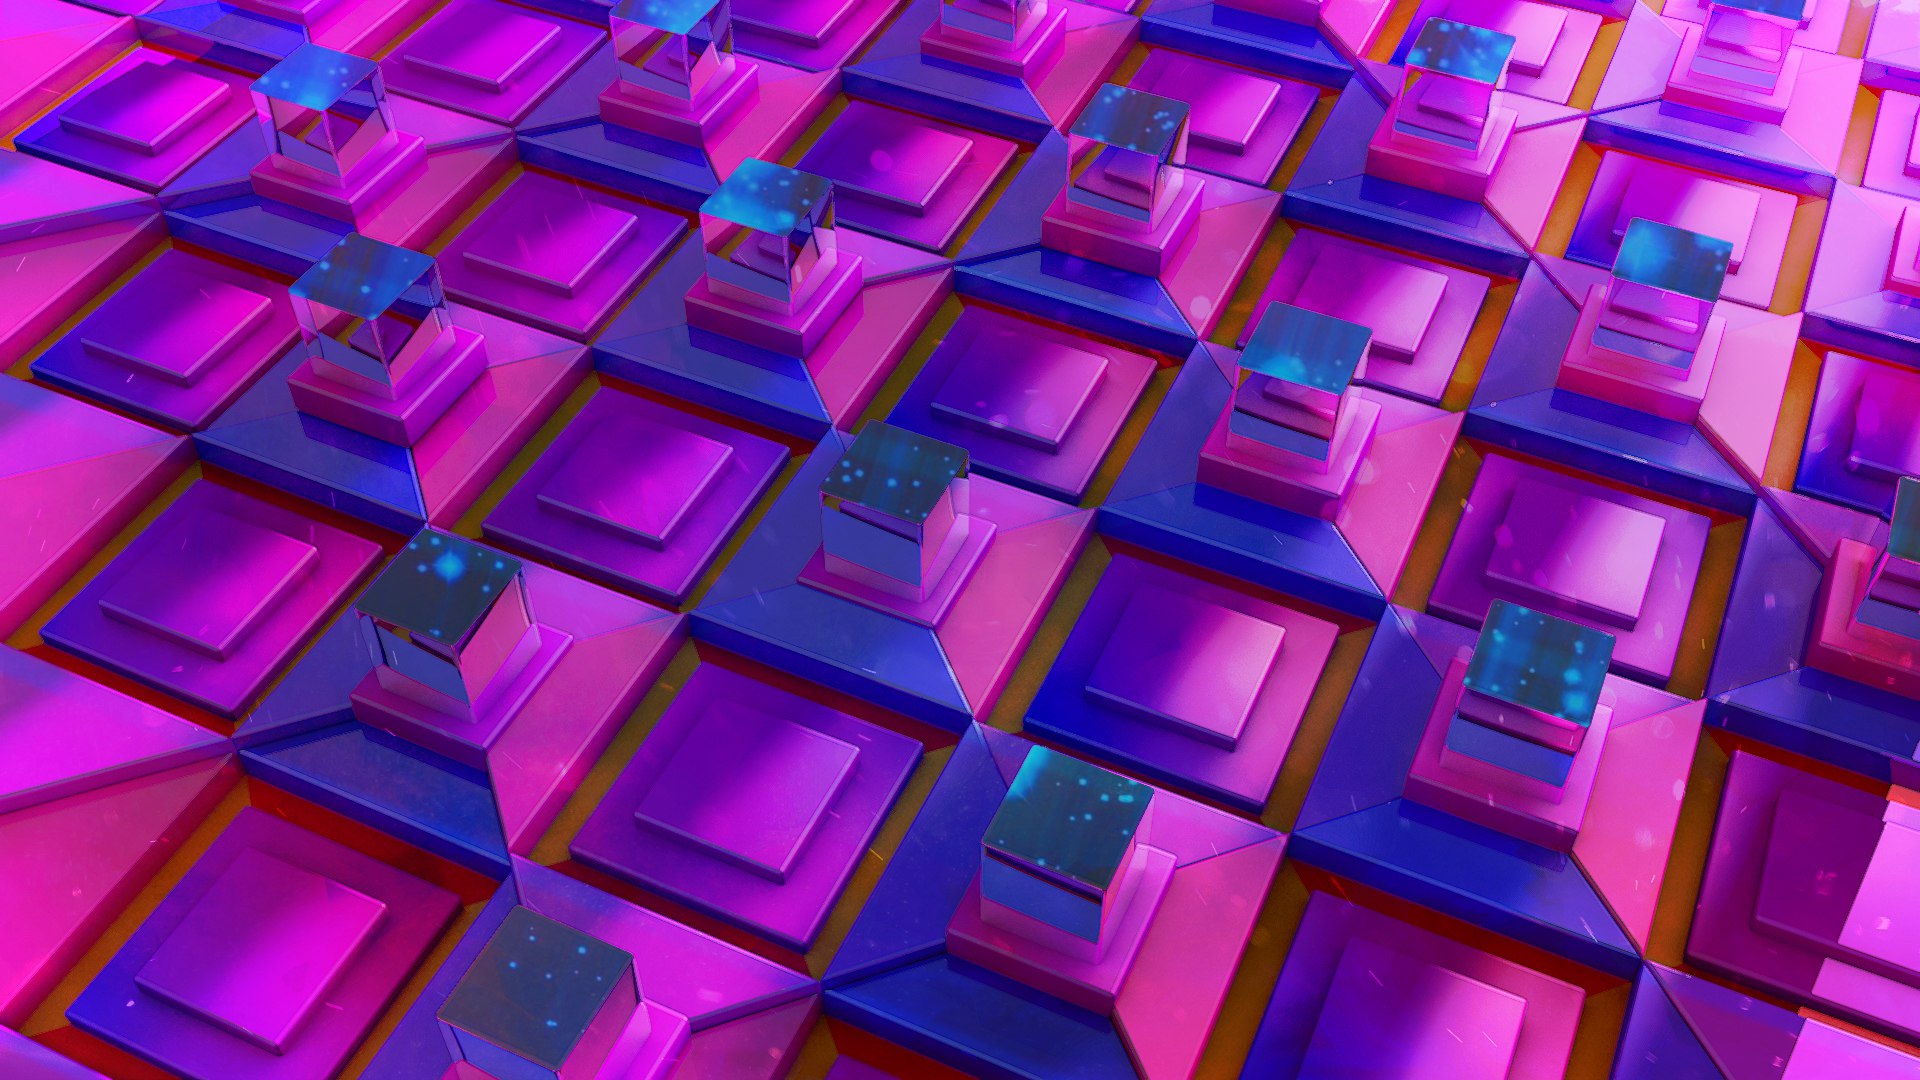 General 1920x1080 3D Abstract square geometric figures pink blue cube